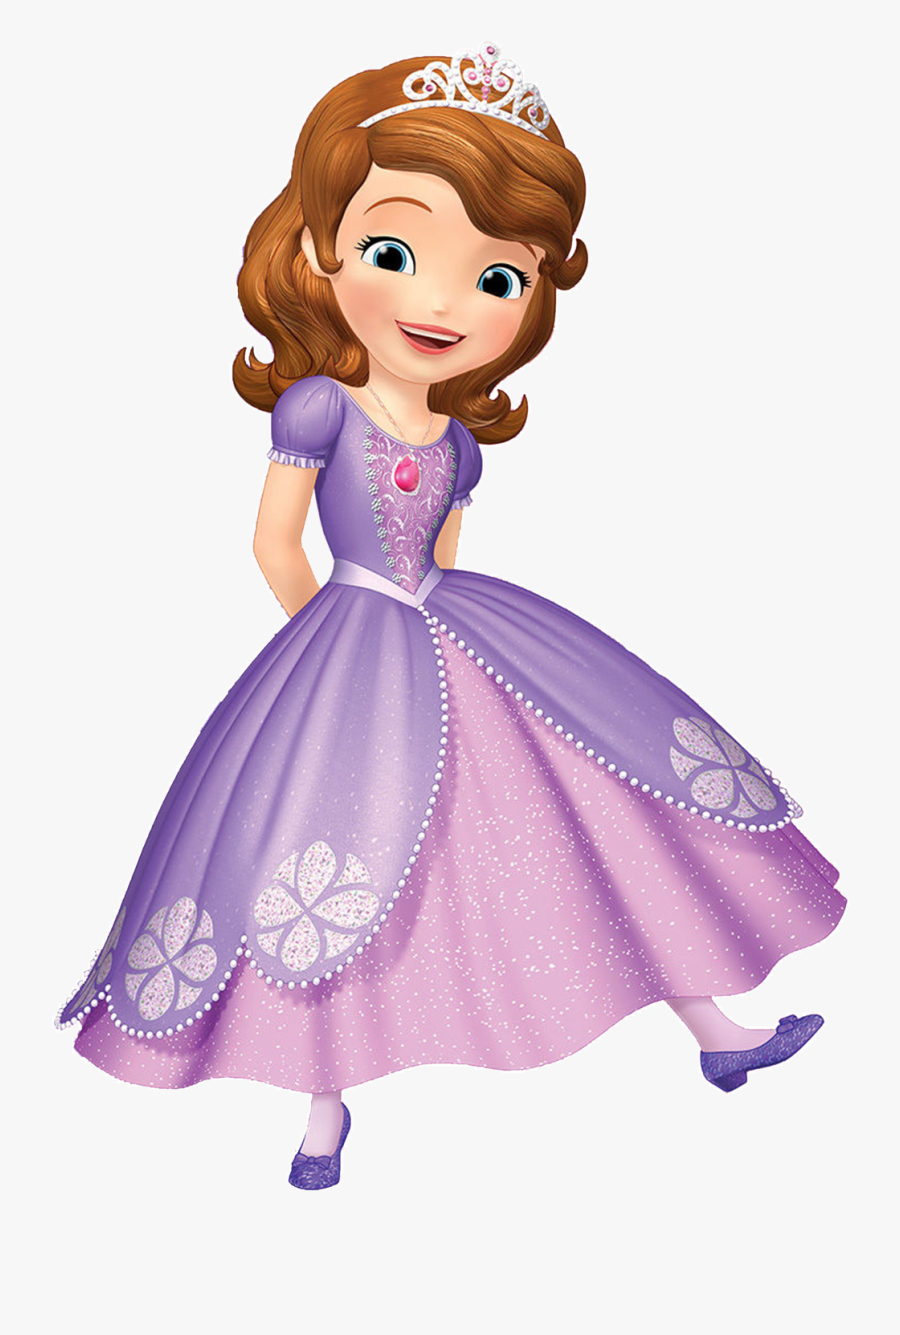 Sofia The First Png, Transparent Clipart